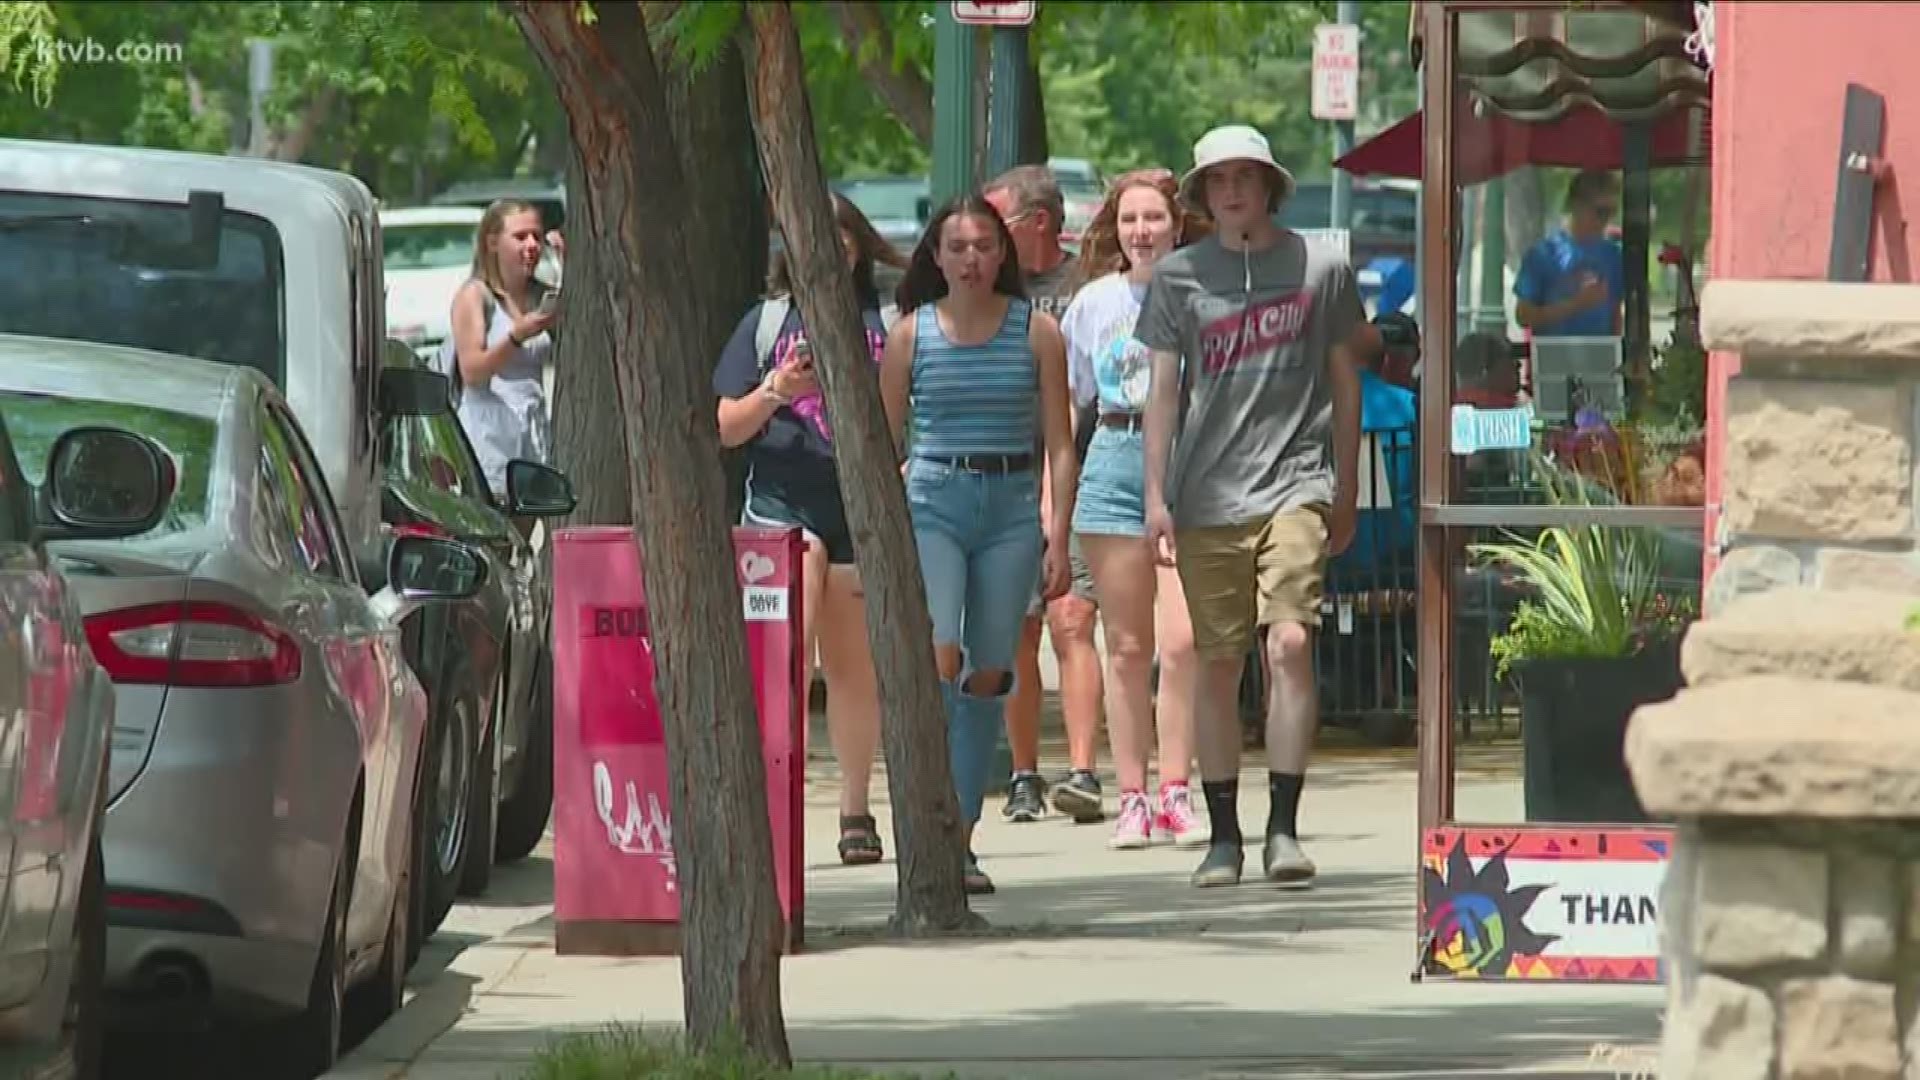 National Geographic Traveler included the Boise neighborhood in a list of the 28 friendliest.